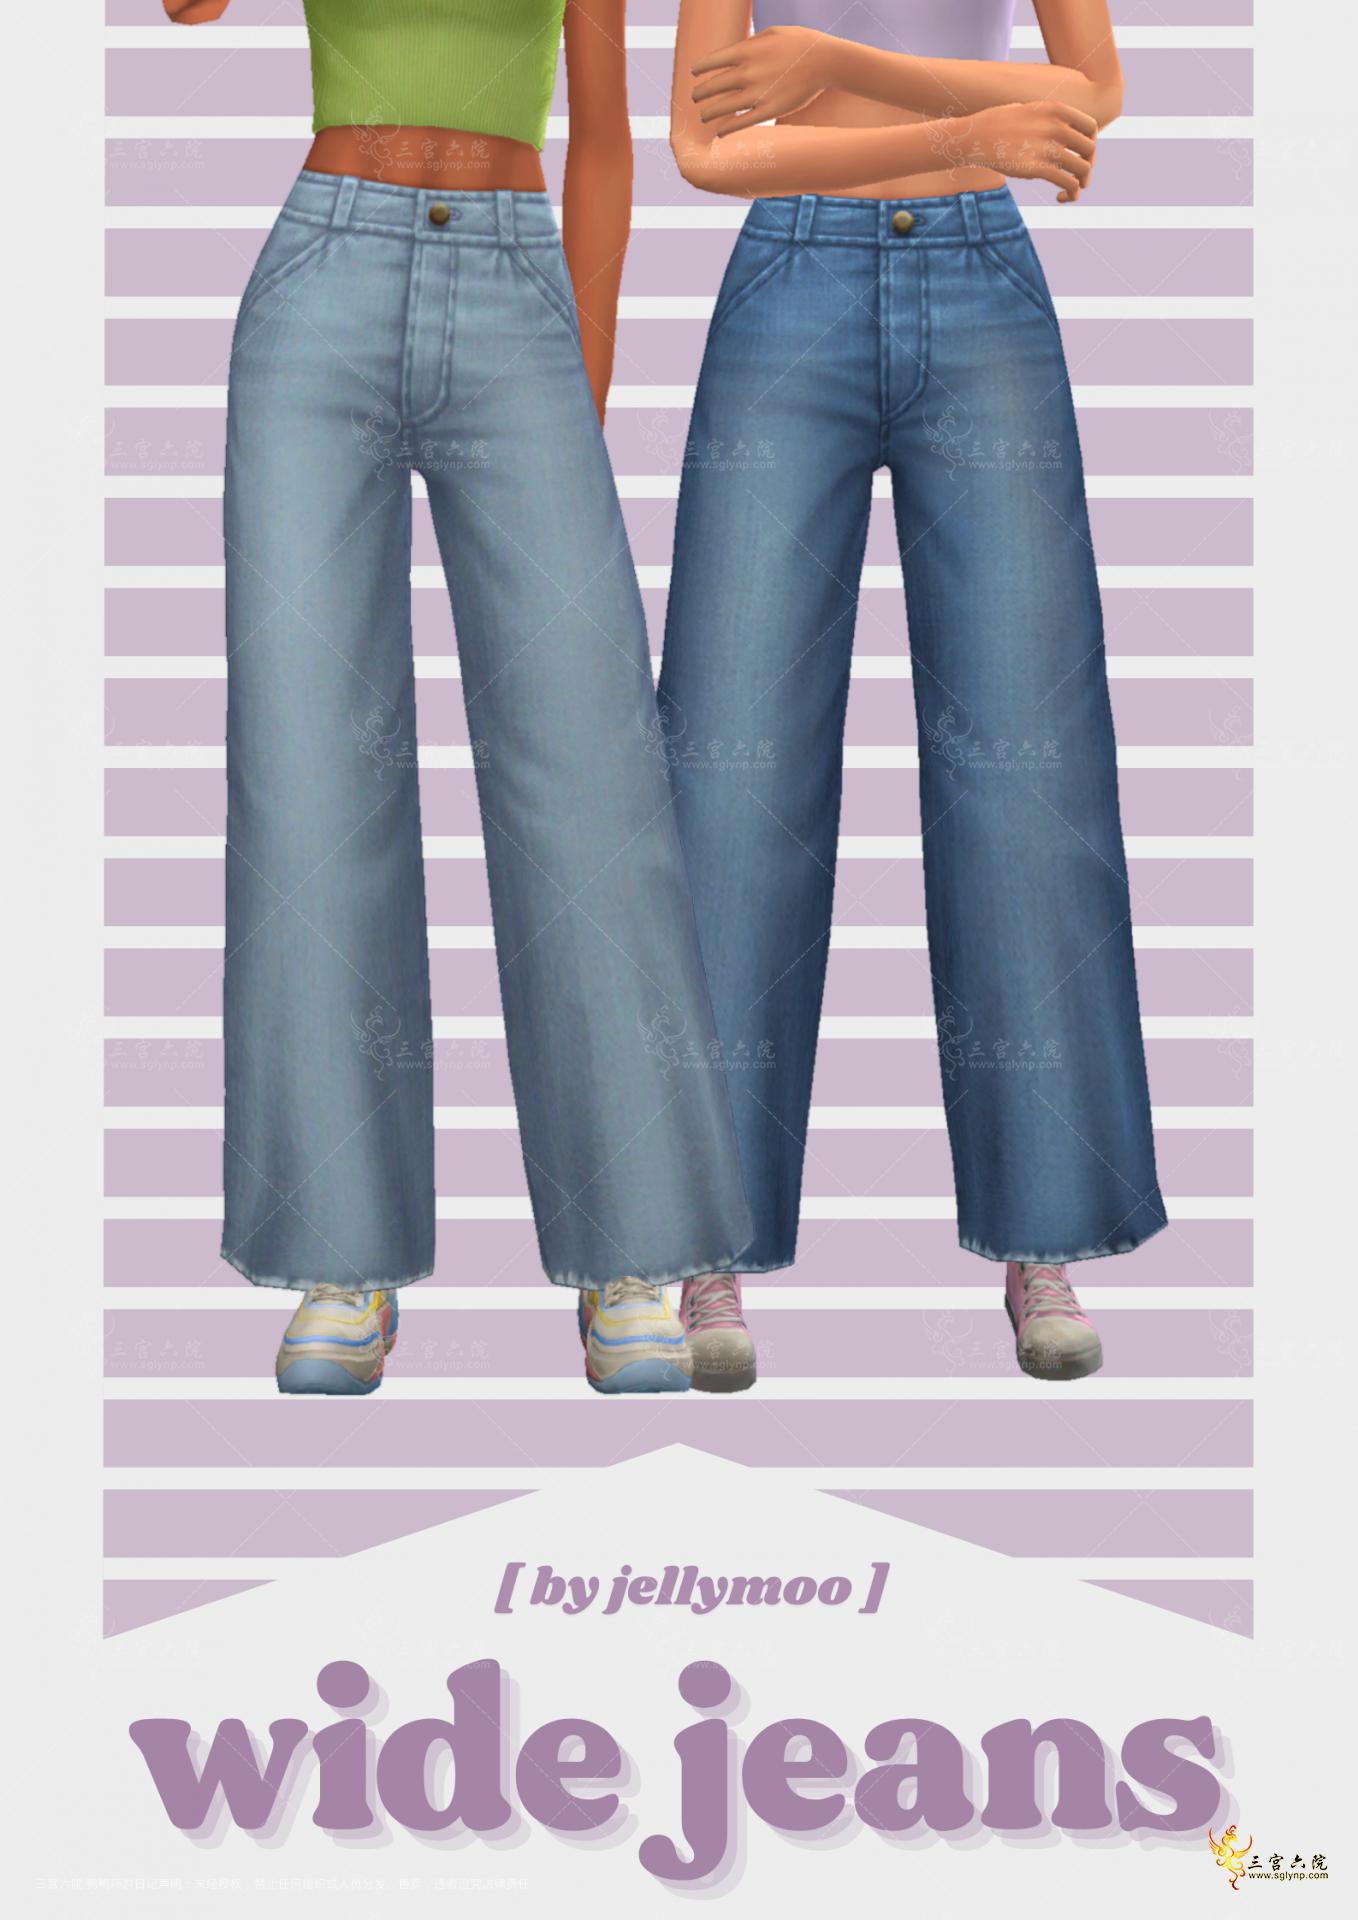 WIDE JEANS POSTER.png